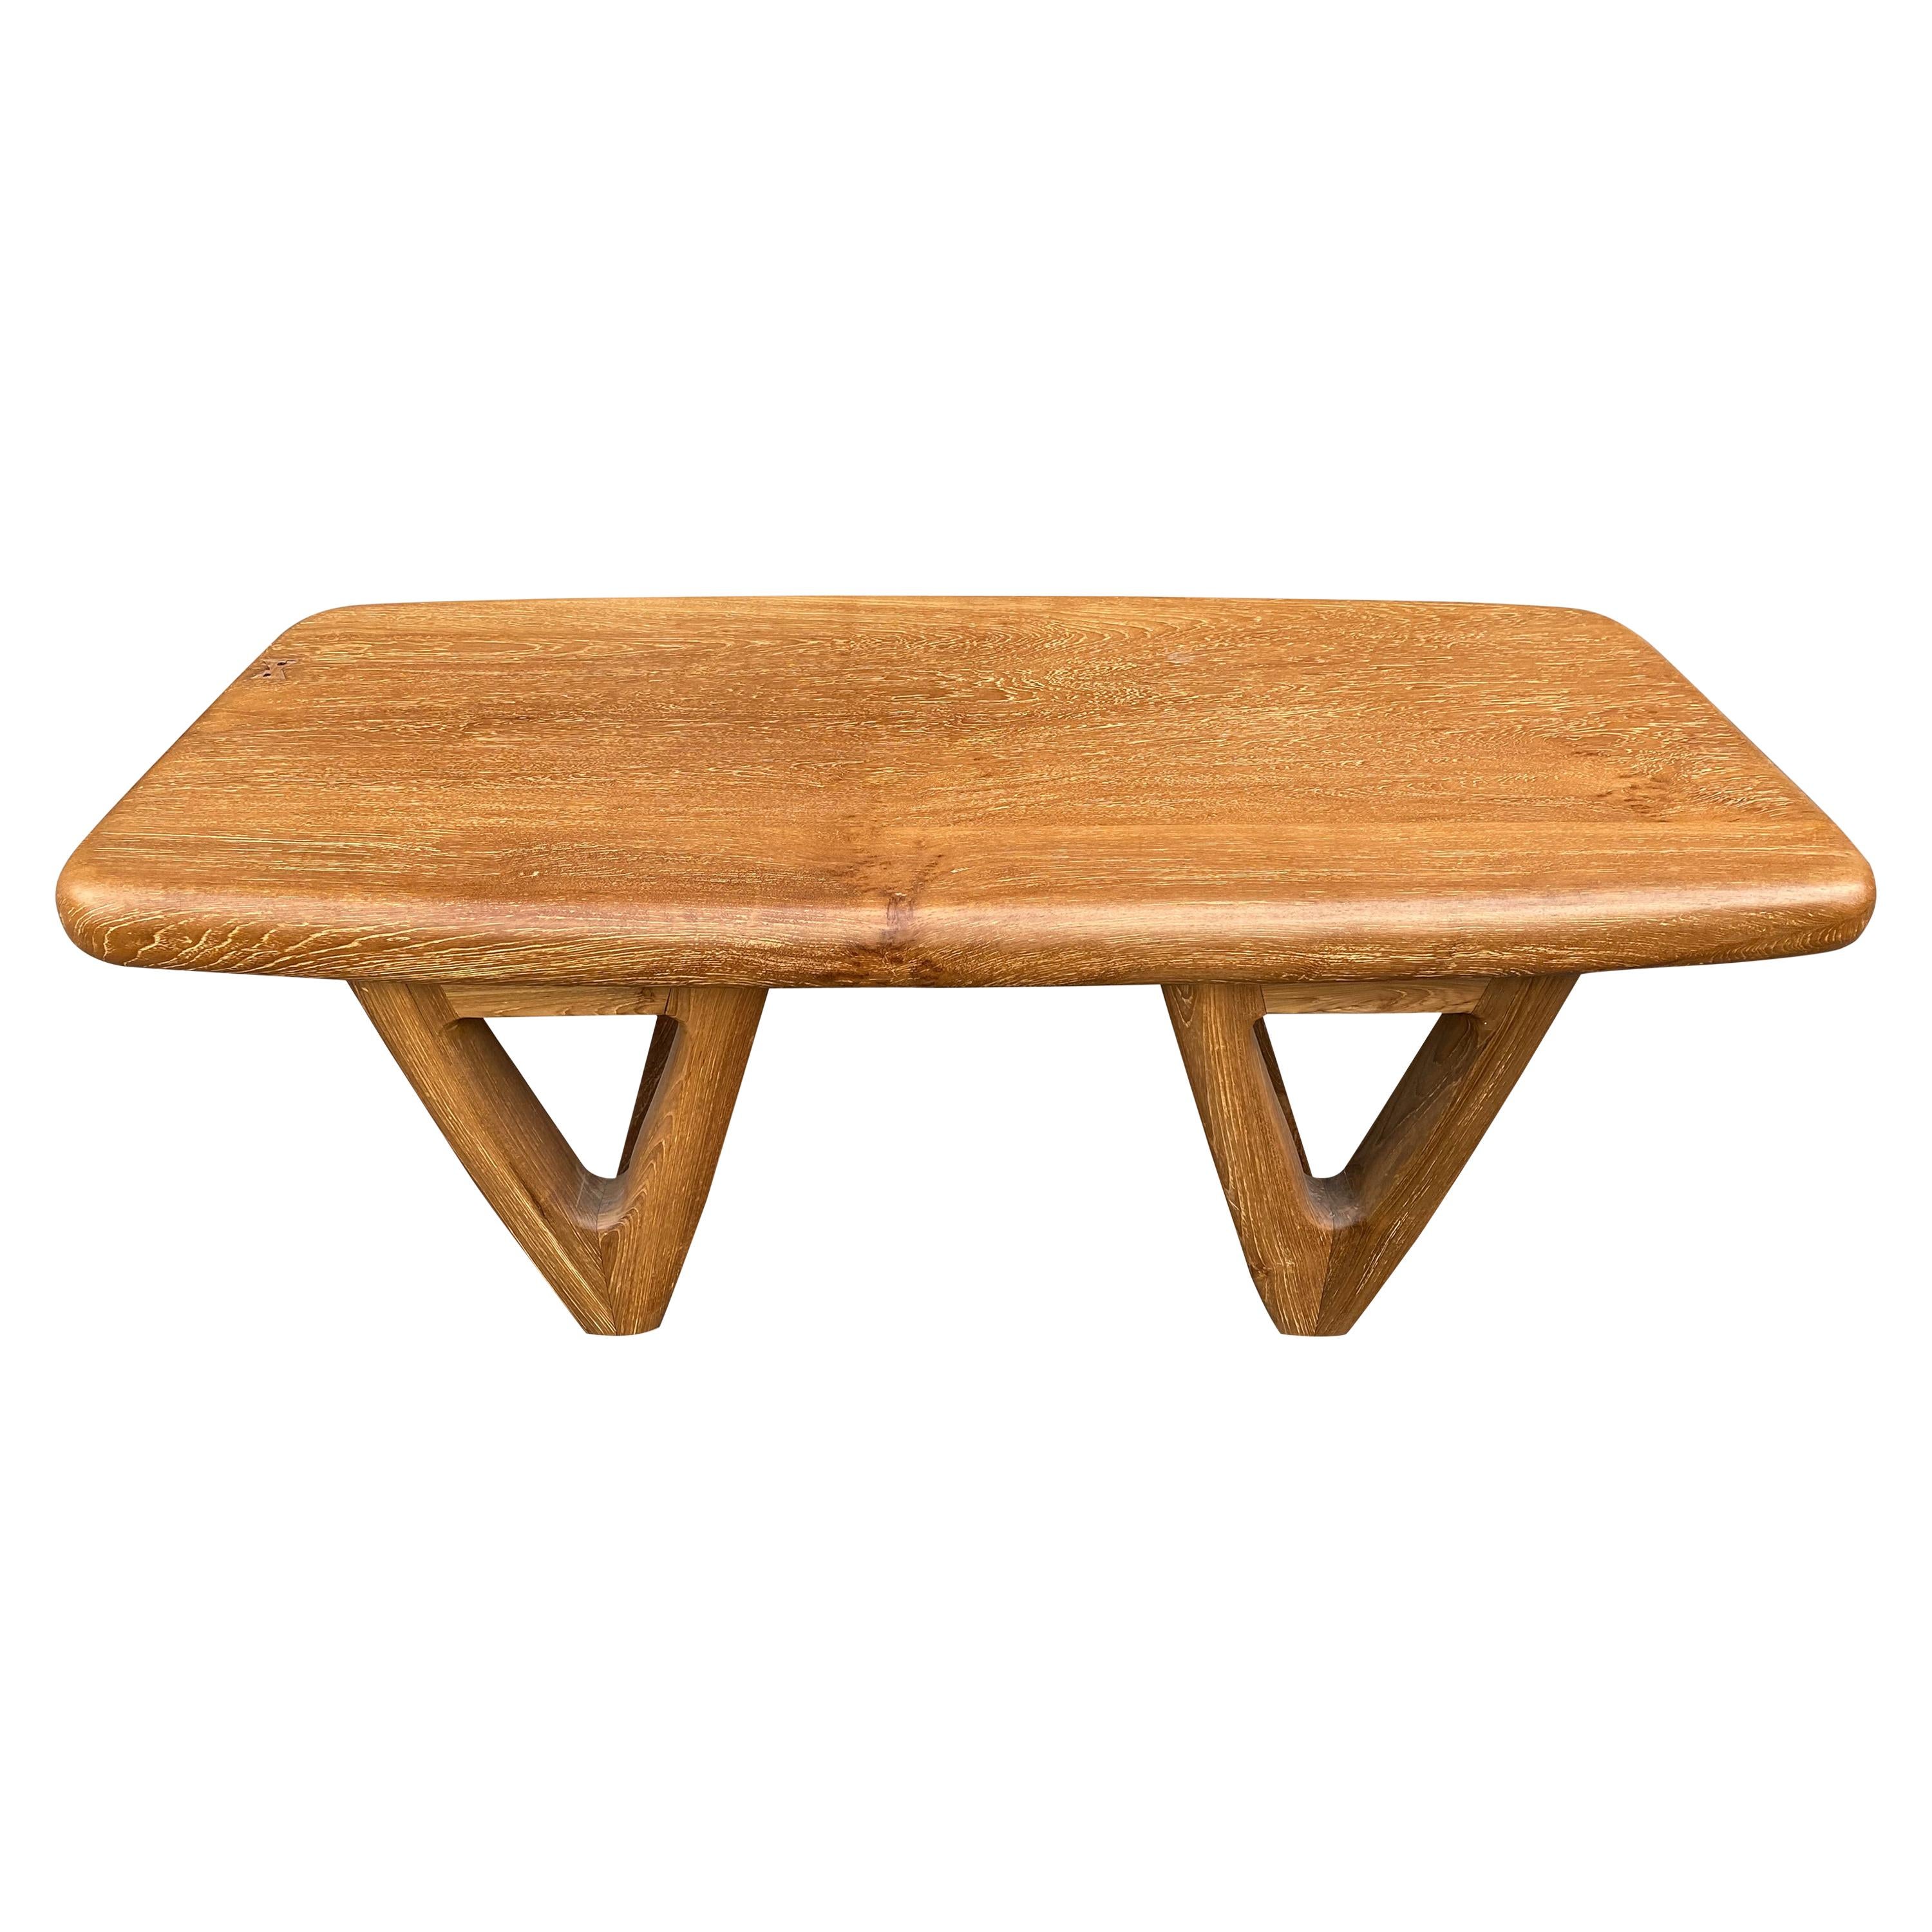 Andrianna Shamaris Mid Century Couture Triangle Base Teak Wood Coffee Table For Sale